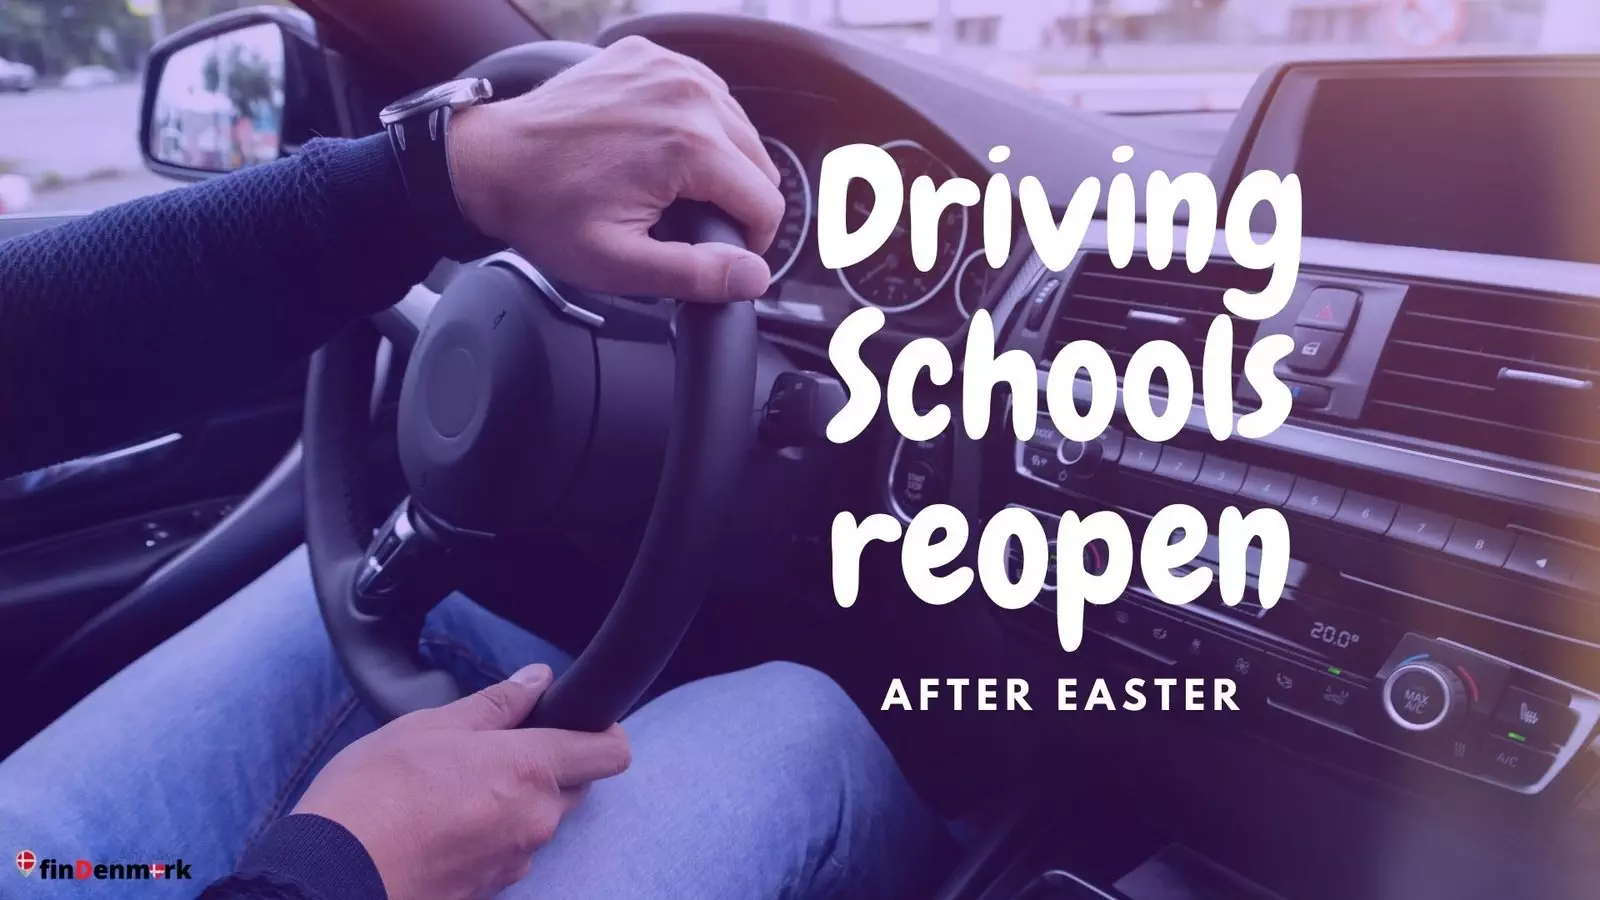 LONG WAITING TIME FOR DRIVING TESTS…. Driving Schools reopen after Easter